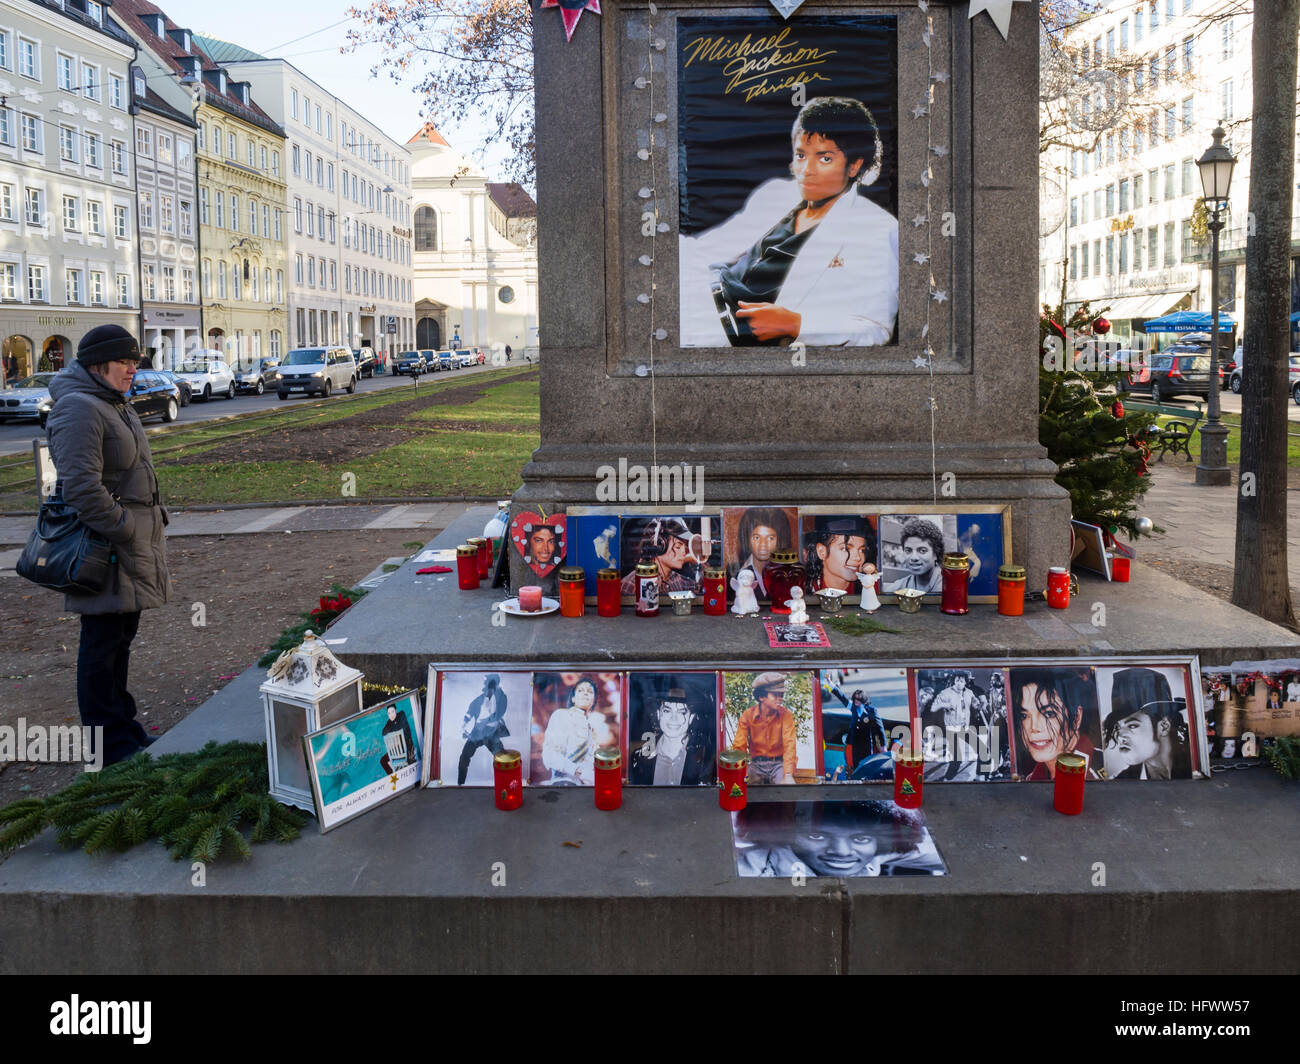 Munich, Germany - December 29, 2016: A woman is standing next to the so called 'Michael Jackson Memorial' at Munich's Promenadeplatz across the hotel 'Bayerischer Hof' and is looking at votive candles, pictures and memorabilia of the late pop star Michael Jackson. Since the death of the artist in 2009, the historic stone monument of Orlando di Lasso has been converted into a shrine and memorial by fans of the 'King of Pop' who used to occupy a suite at the nearby luxury hotel when staying in Munich. Stock Photo